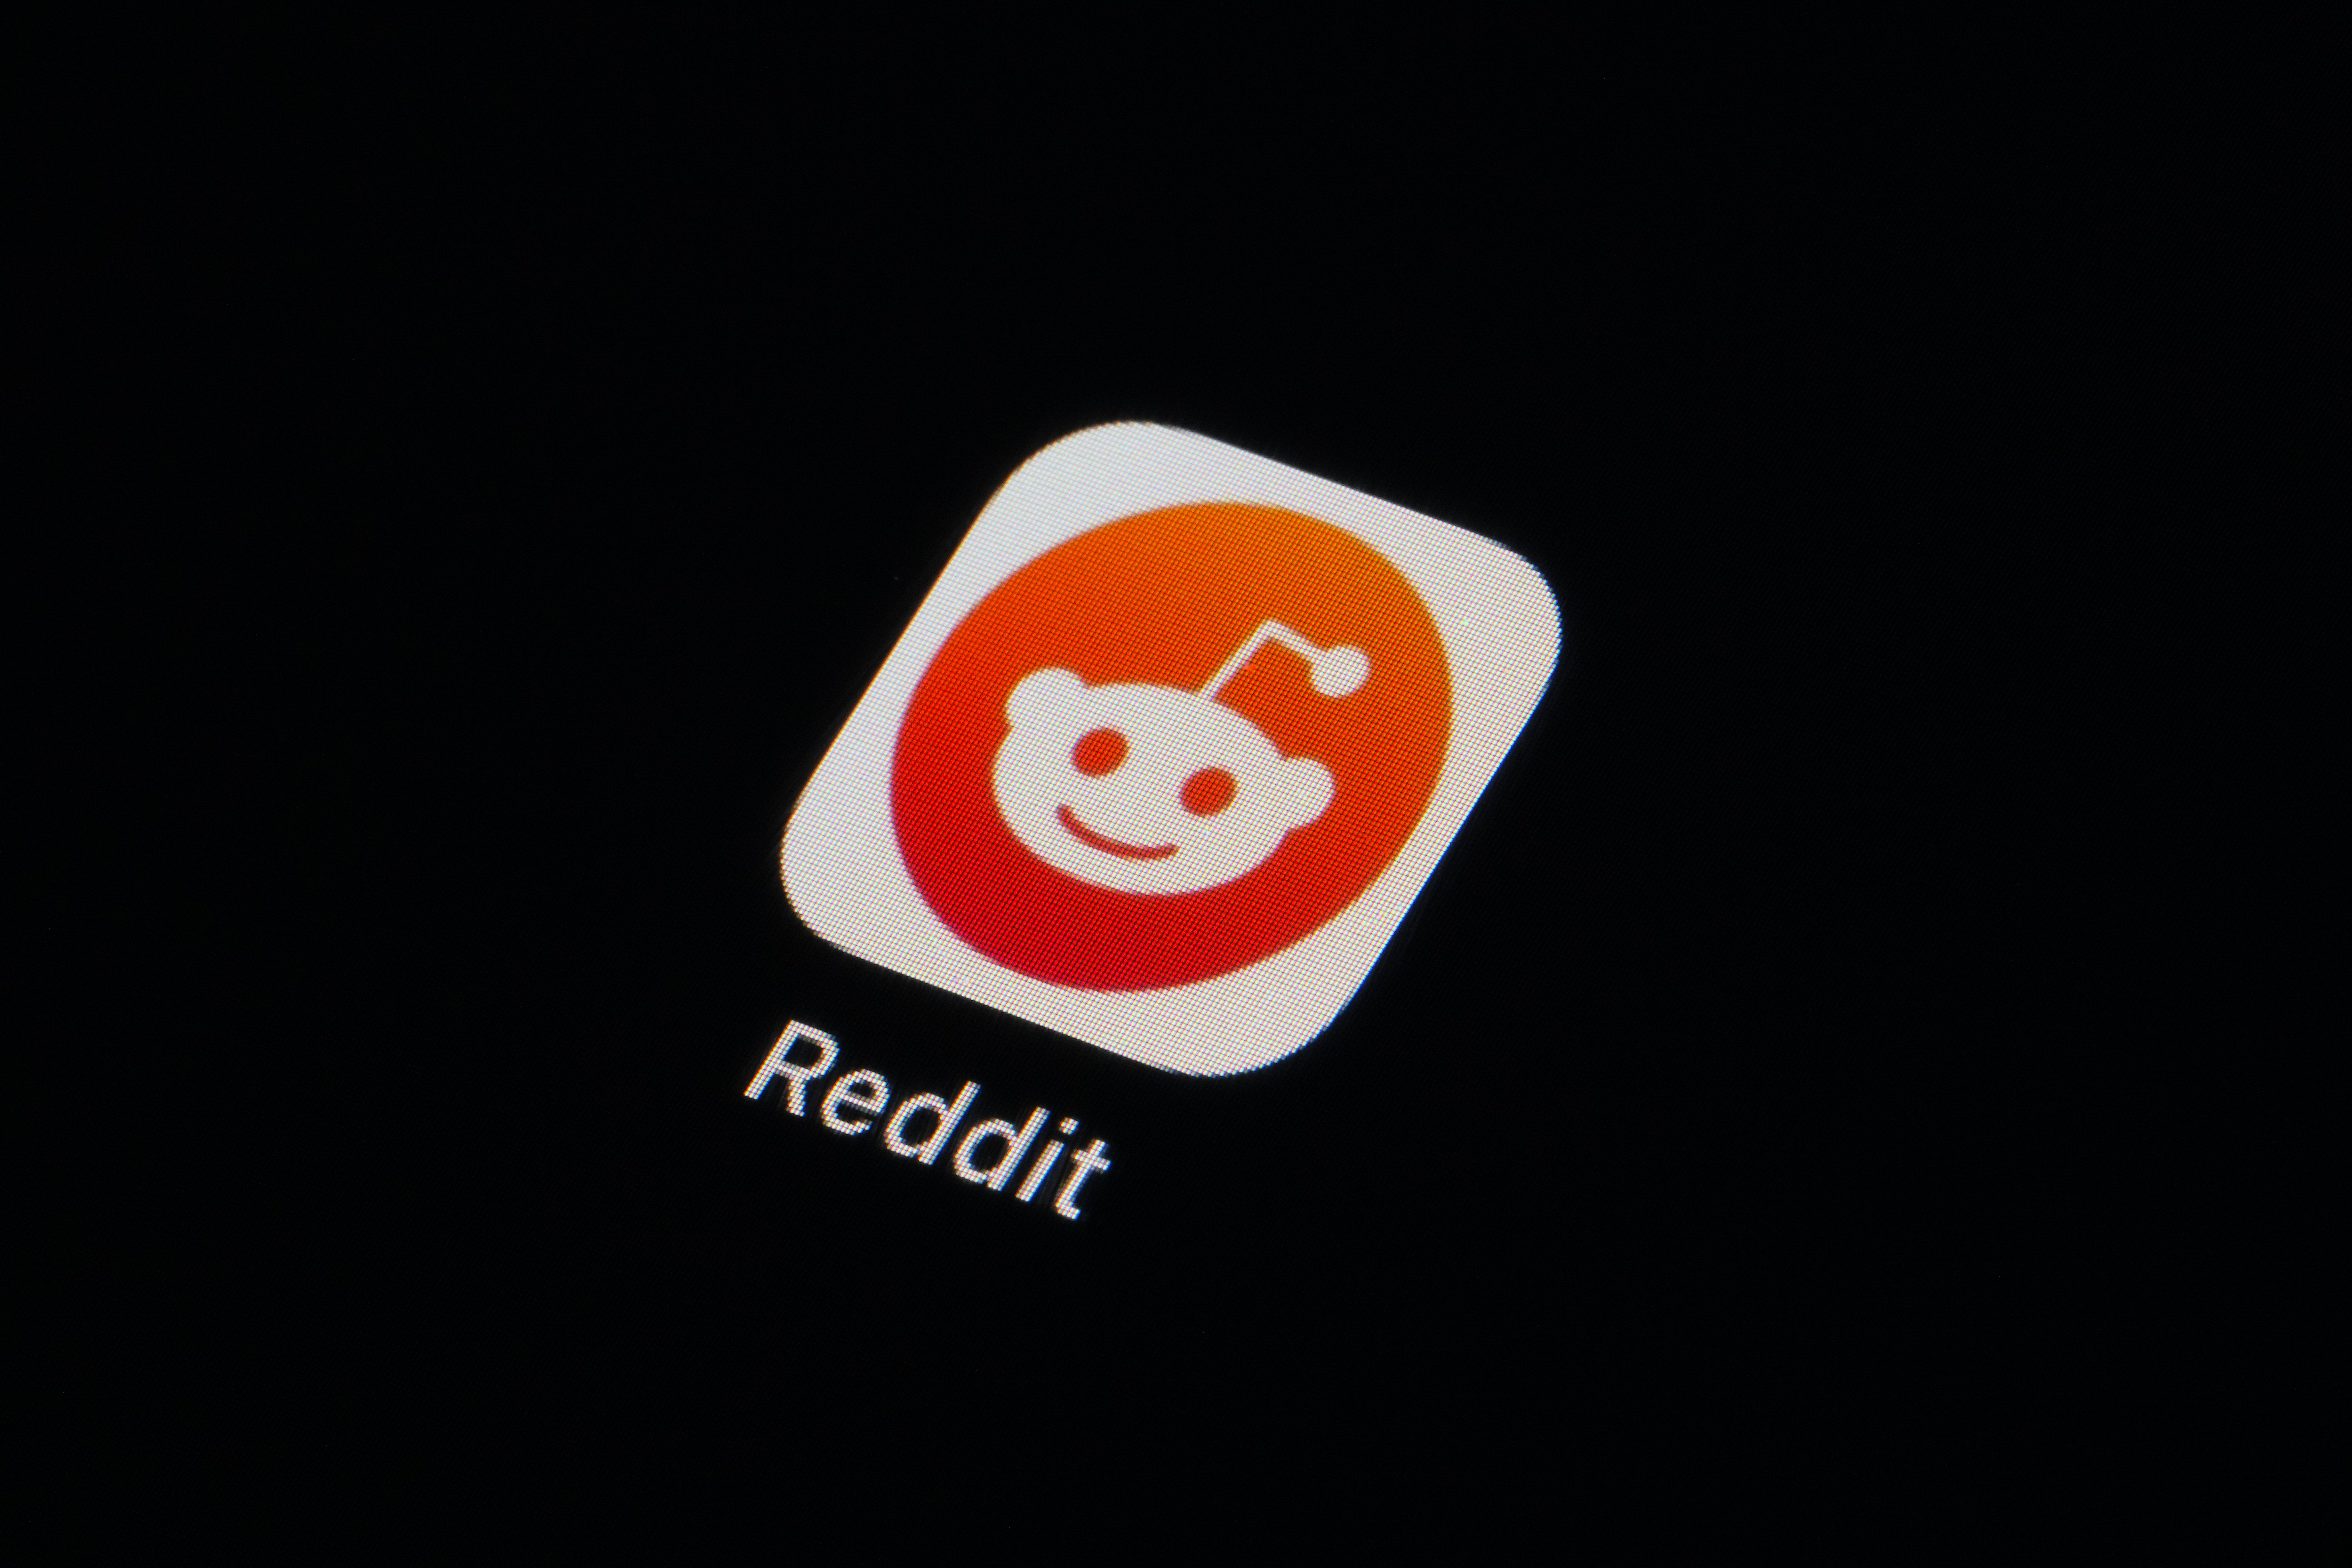 Despite protests, Reddit CEO says company is not negotiating on 3rd-party app charges